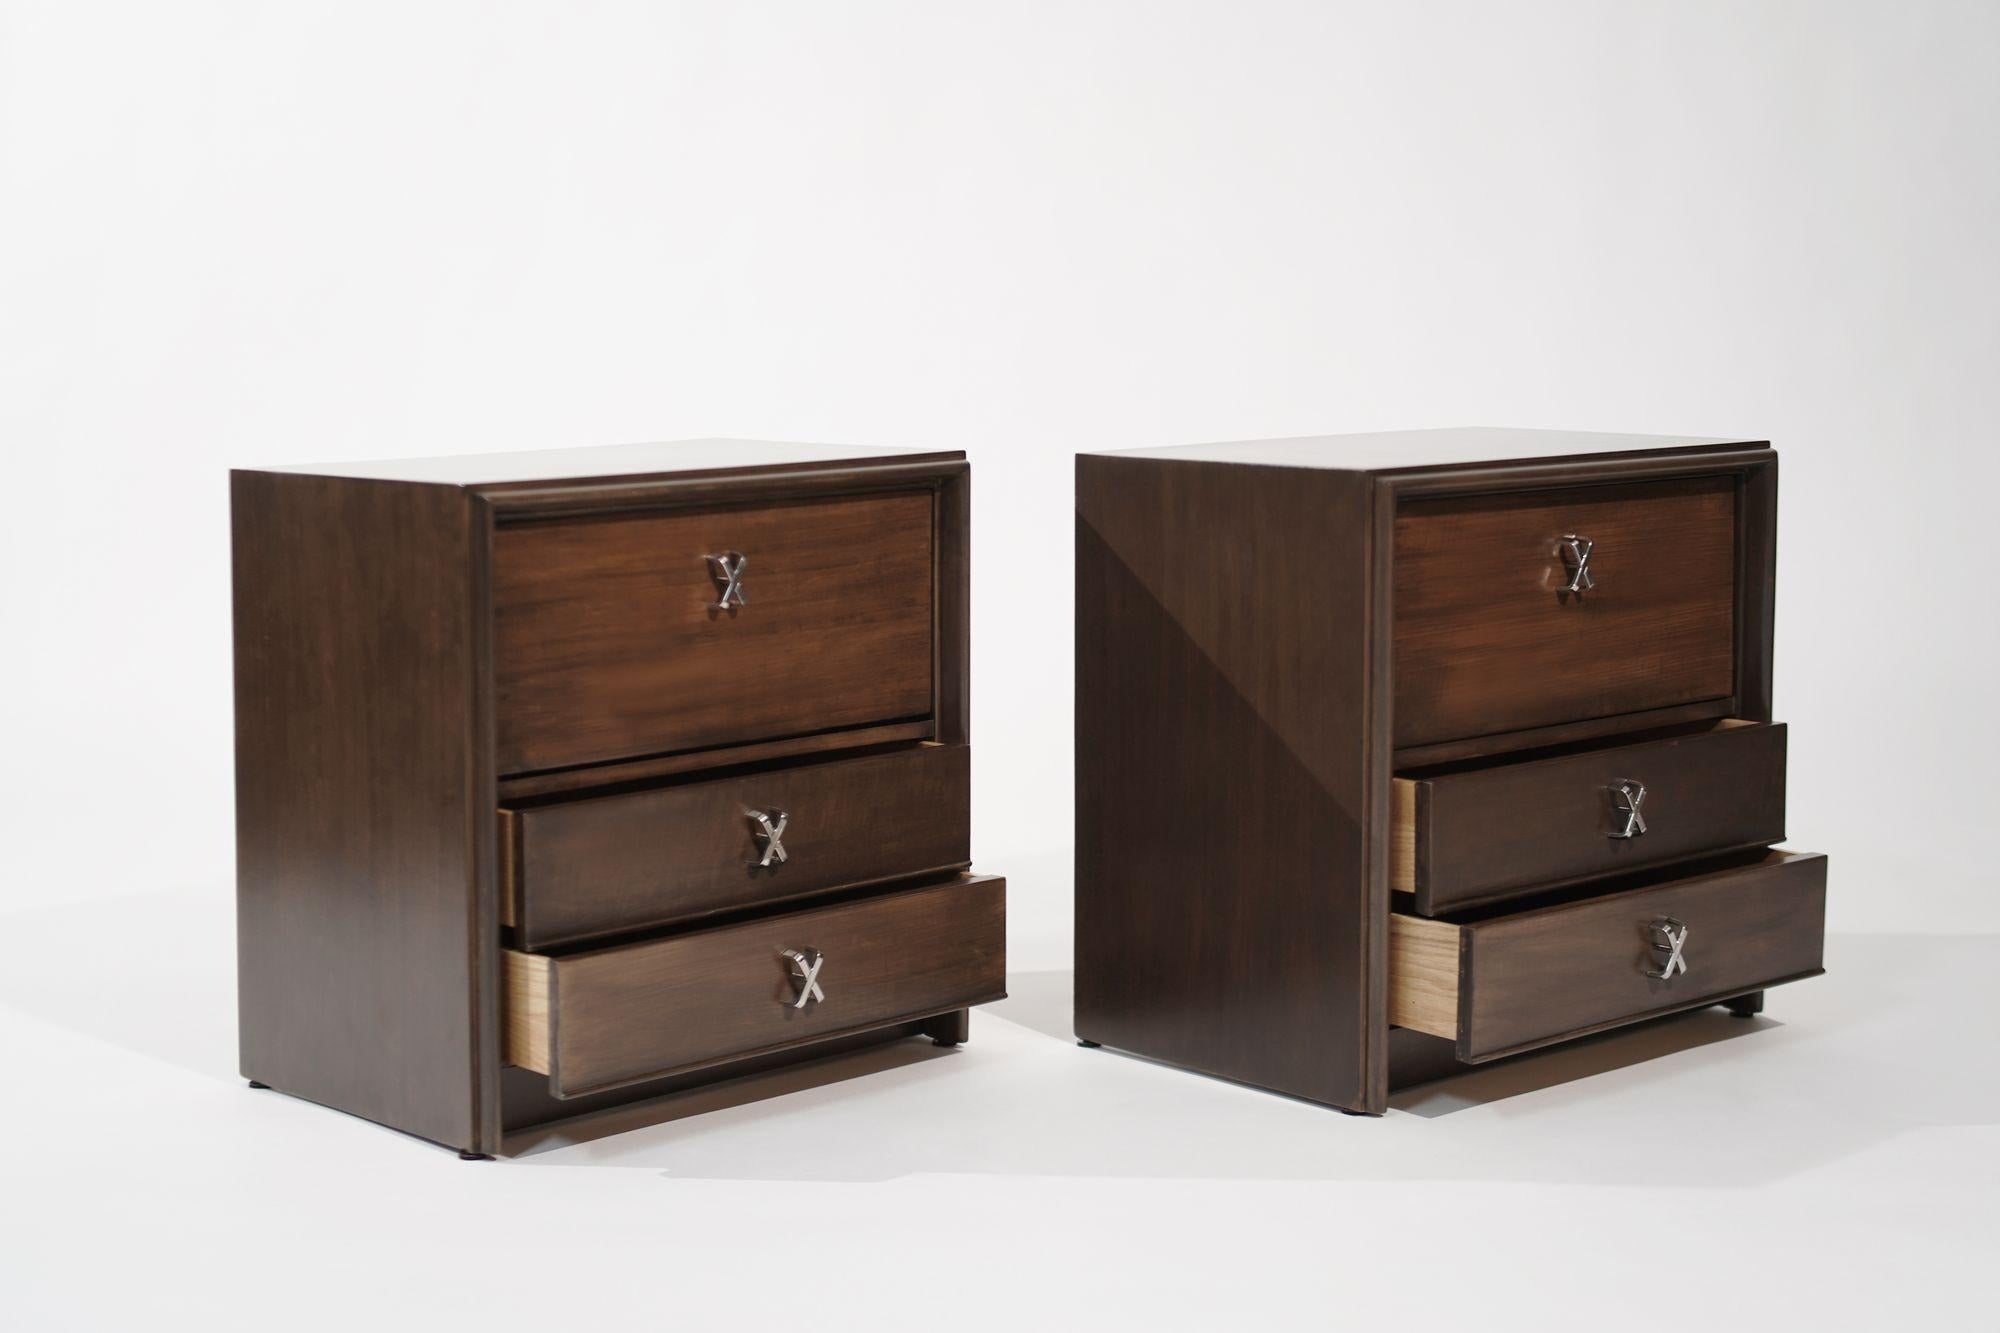 American Set of Nightstands by Paul Frankl, C. 1950s For Sale